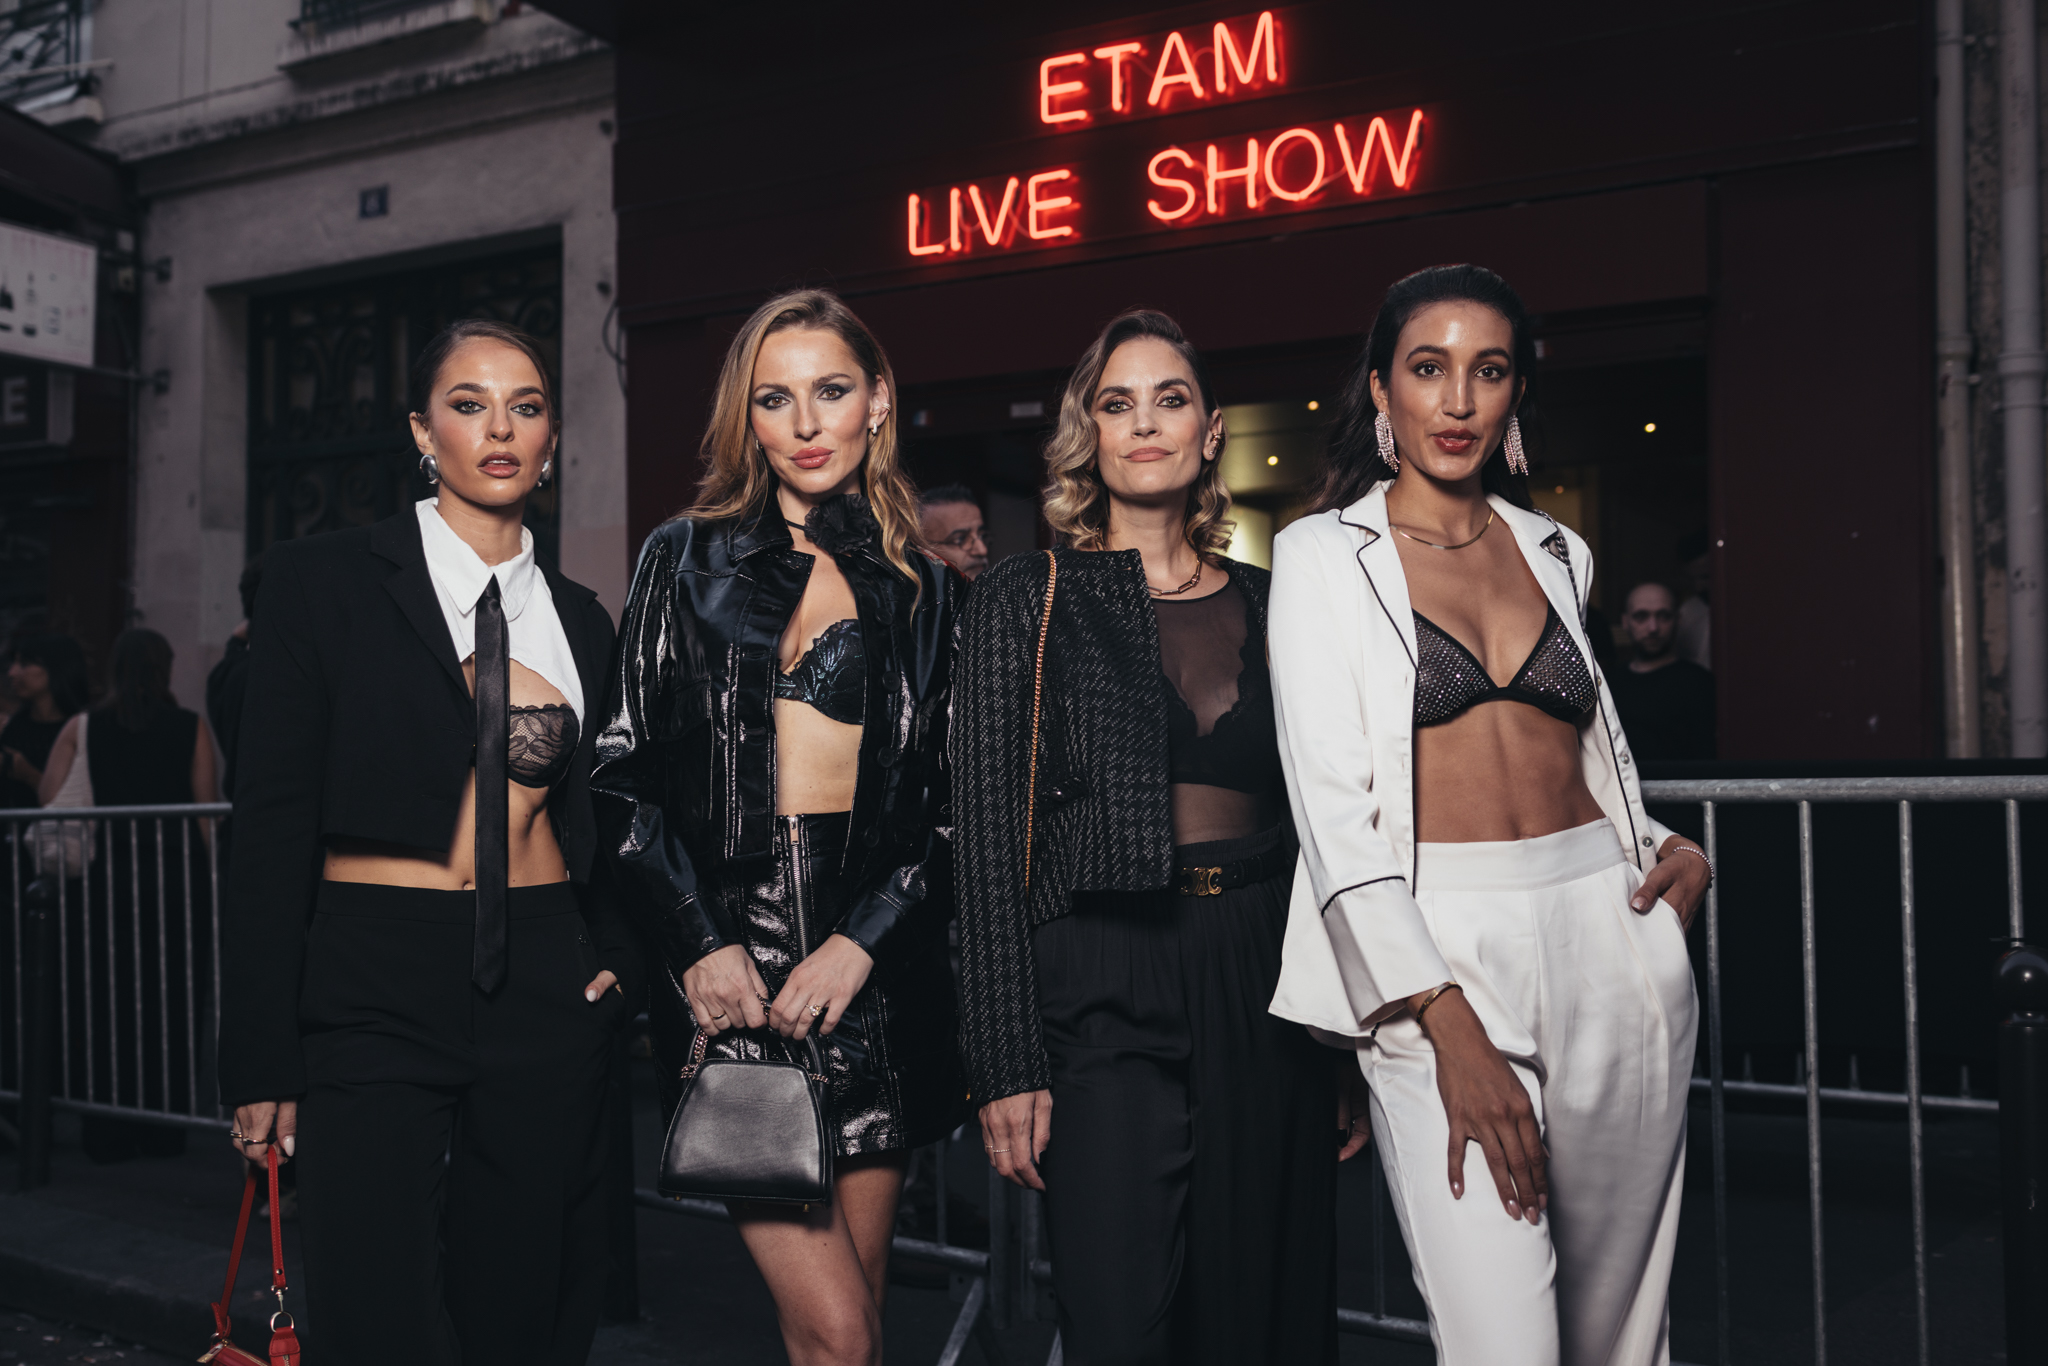 Etam's 80s-Inspired Extravaganza: A Dazzling Etam Live Show 2023 in Paris during PFW. Insights from the trip to Paris with the Swiss Ambassadors Team. 36